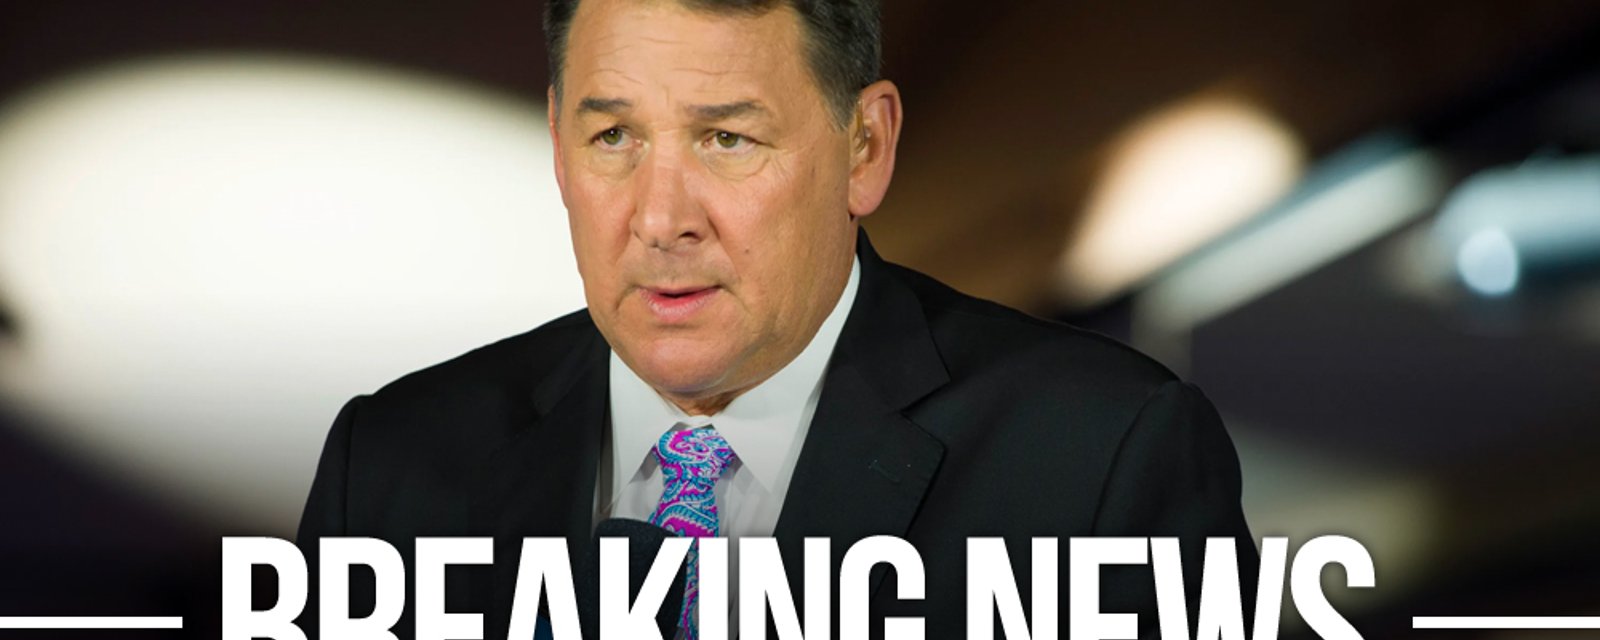 Mike Milbury is out at NBC